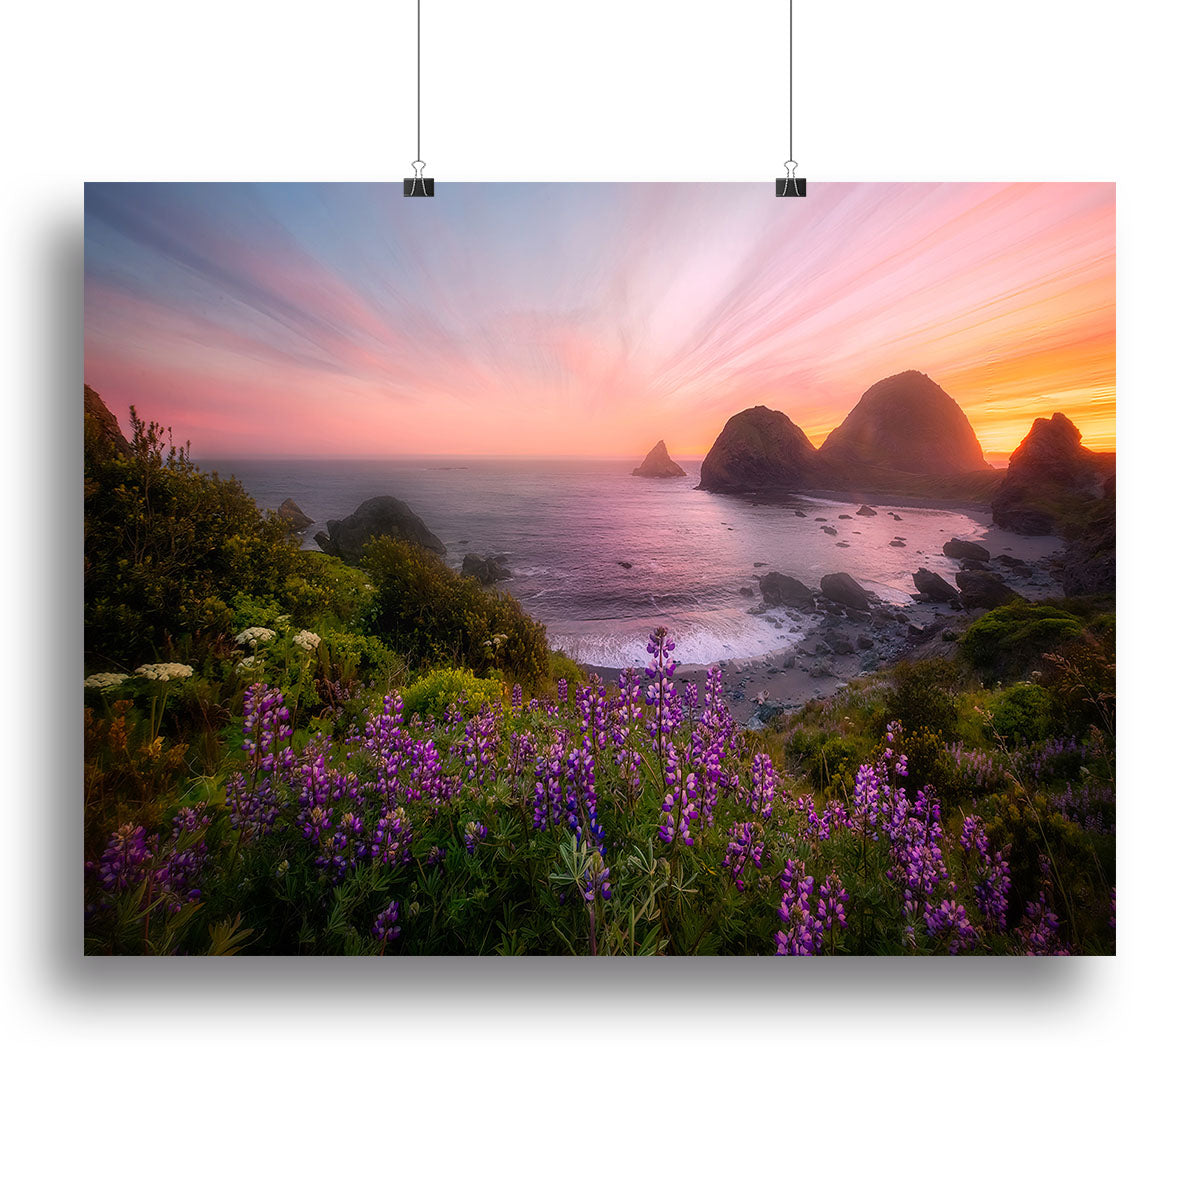 Sister Rocks with Lupin Blooms Canvas Print or Poster - Canvas Art Rocks - 2